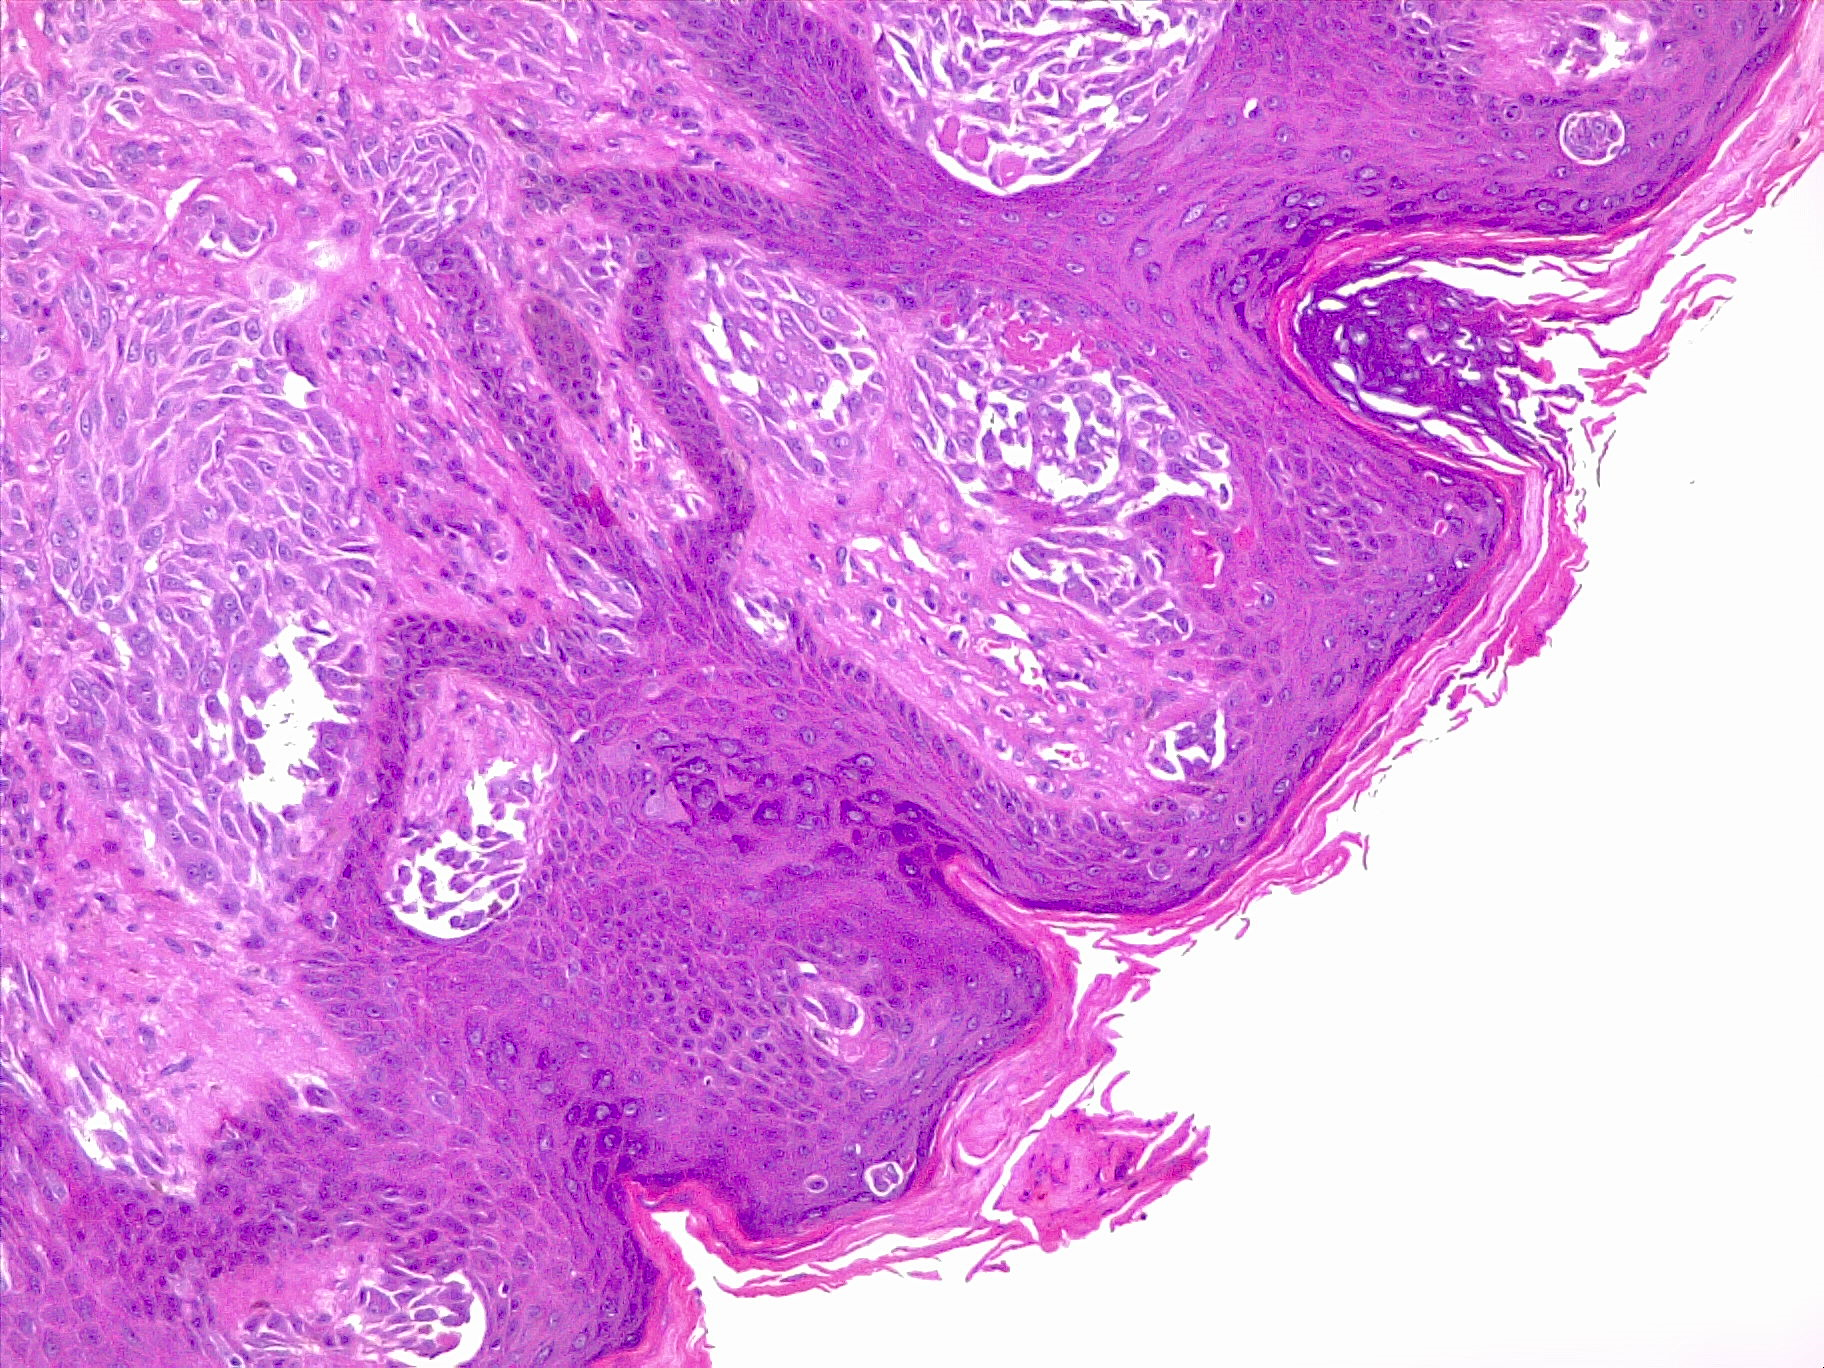 Malignant melanoma. In this 10x field is shown the superficial spread of atypical melanocytes invading the epidermis.